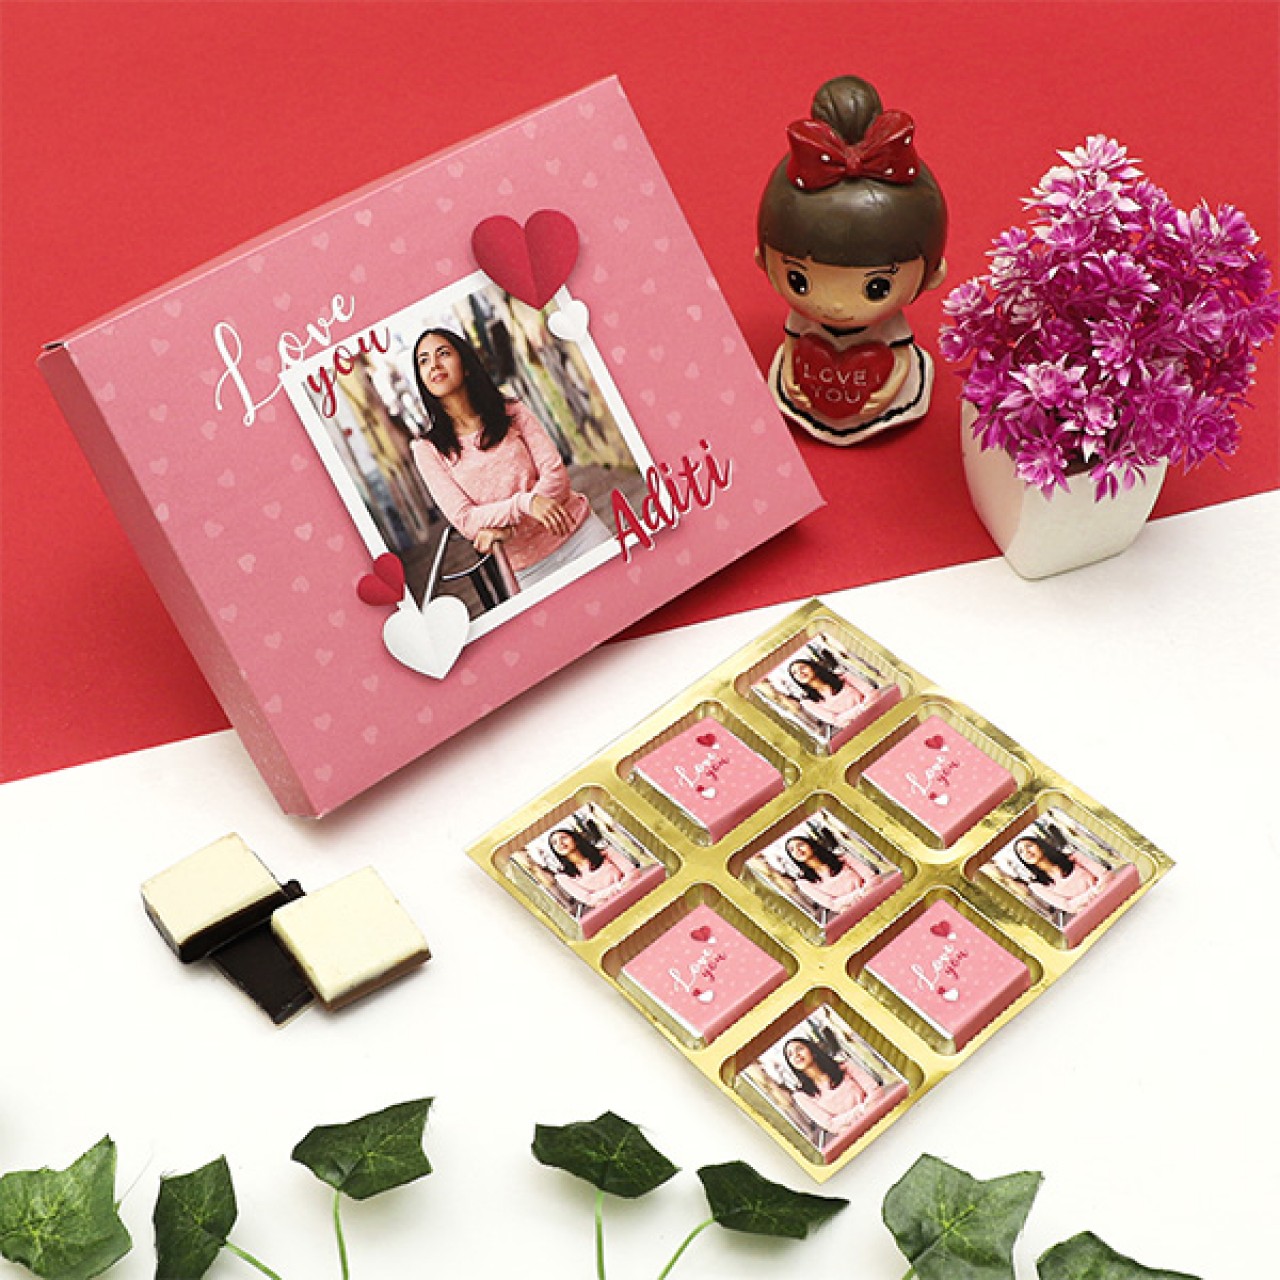 Personalized Love You Chocolate Box With Photo